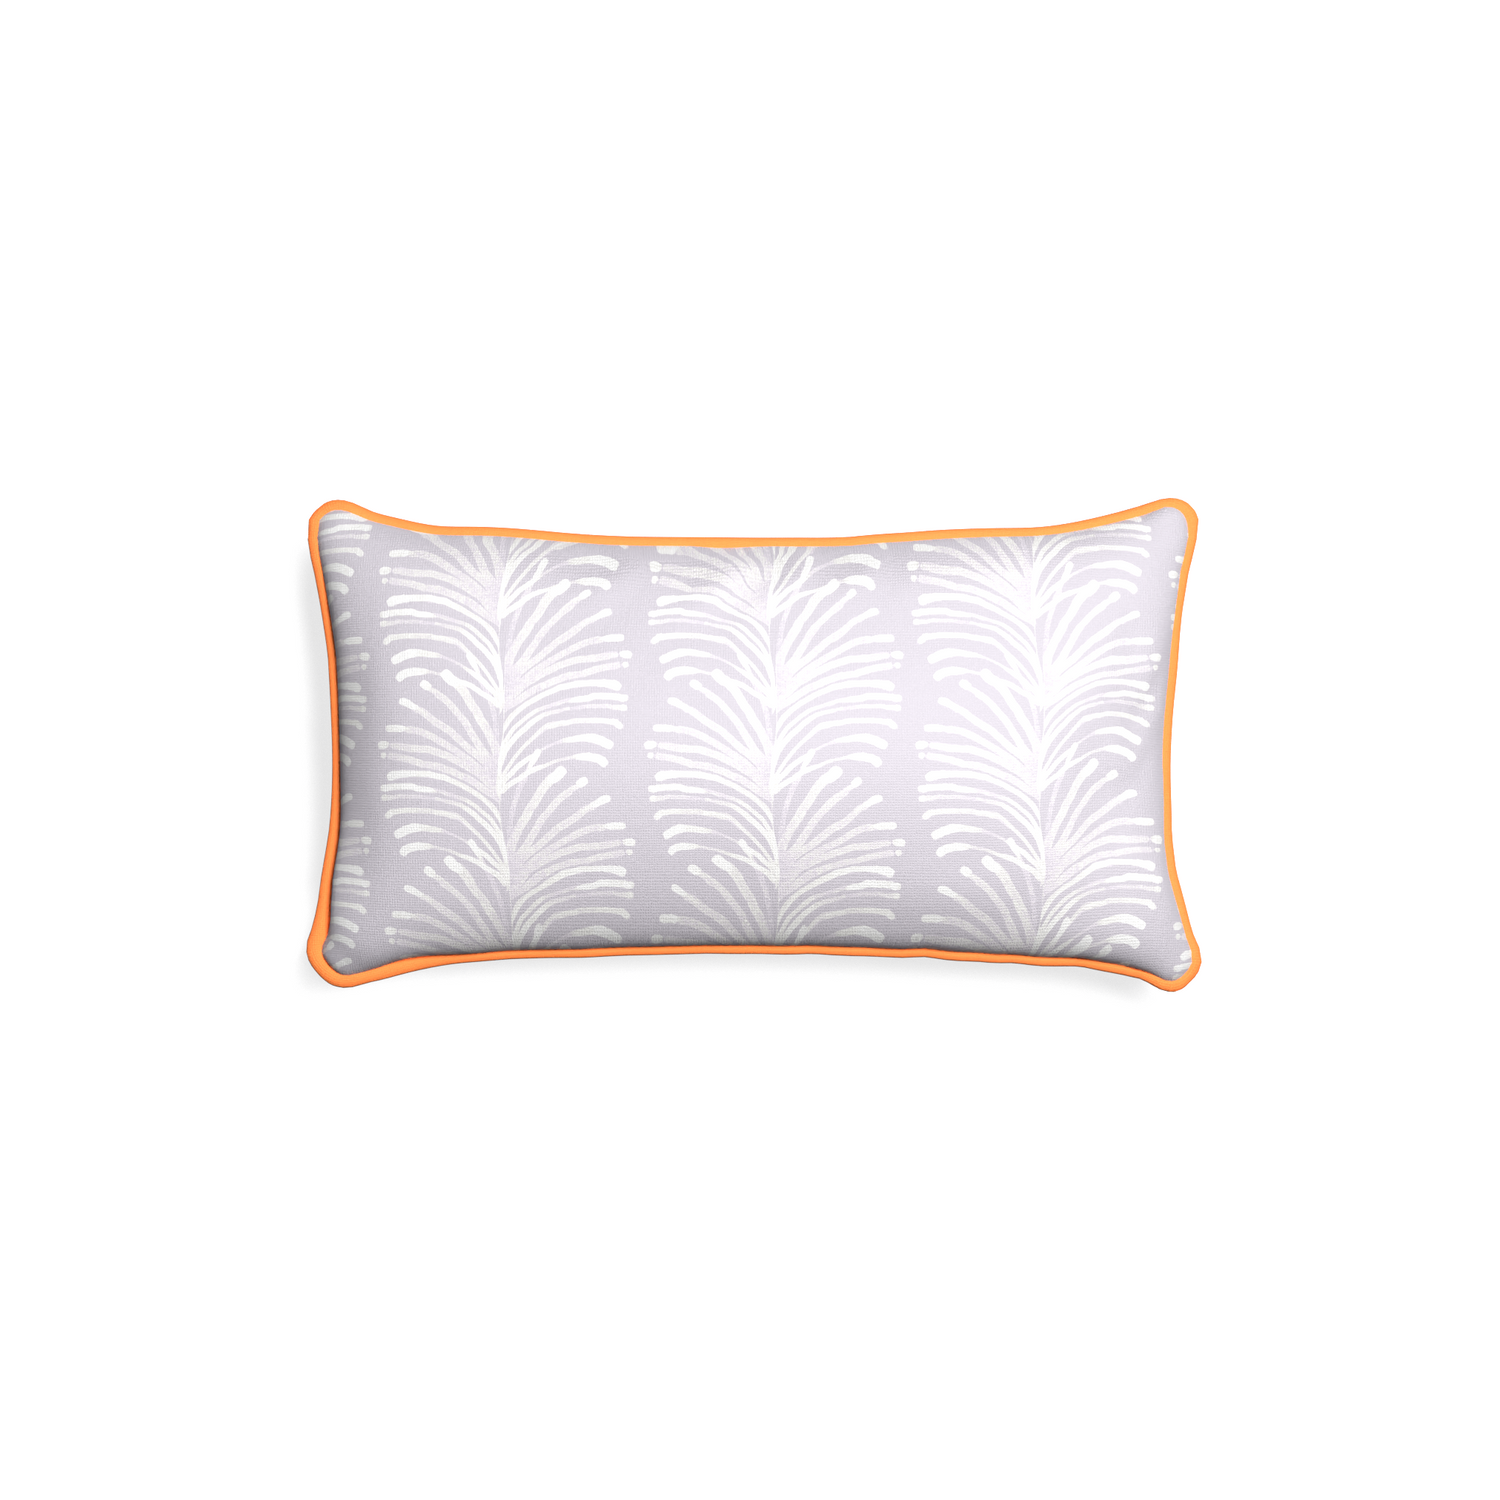 Petite-lumbar emma lavender custom lavender botanical stripepillow with clementine piping on white background